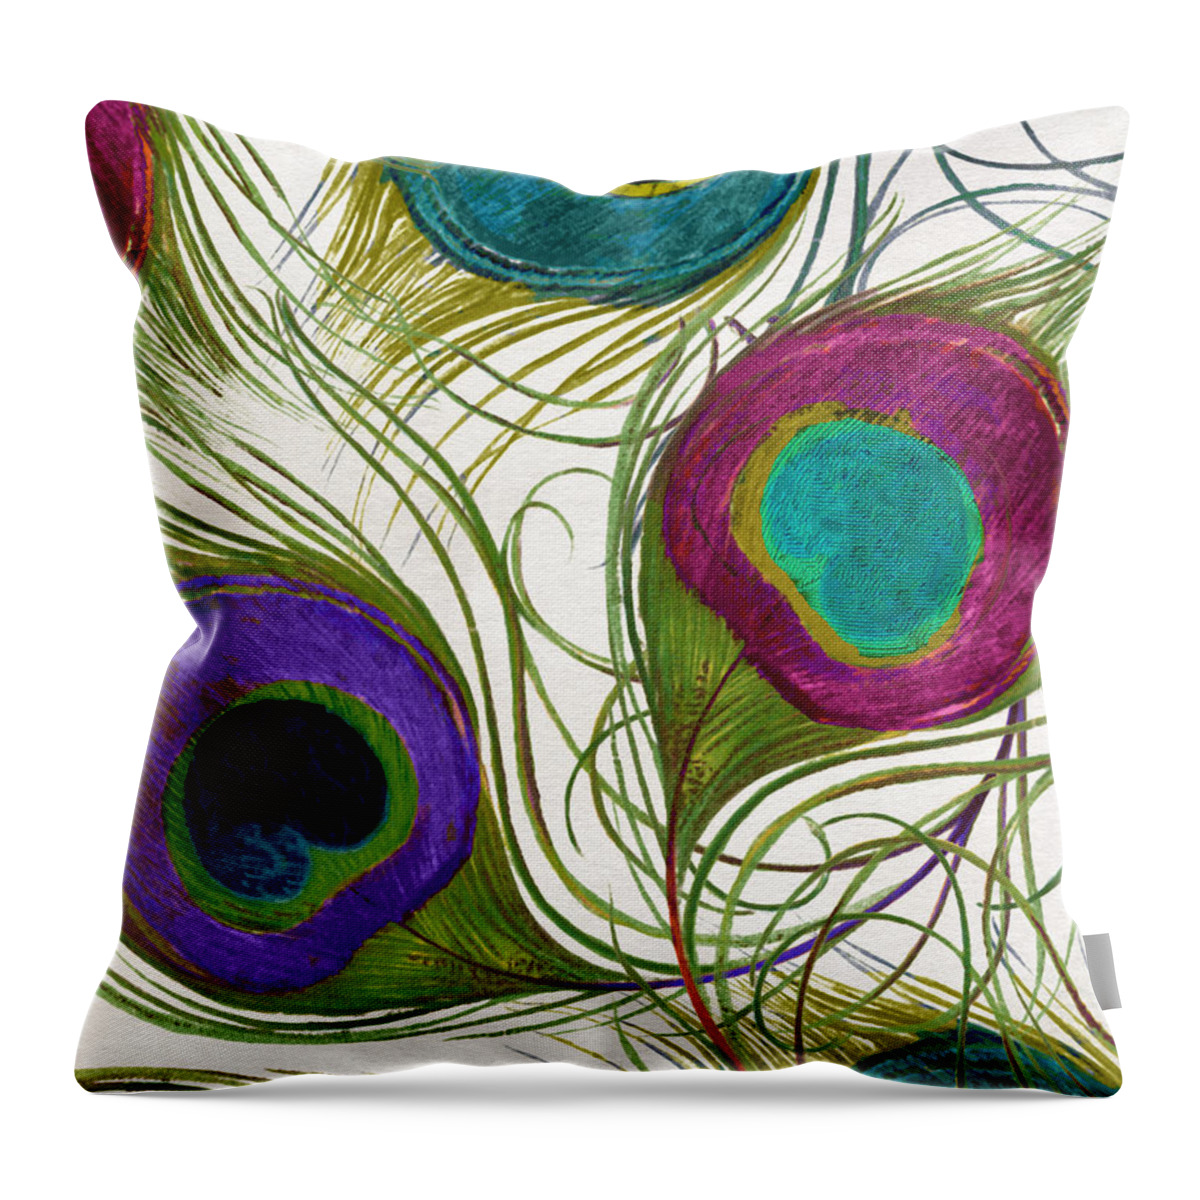 Peacock Feathers Throw Pillow featuring the painting Peacock Feathers by Mindy Sommers